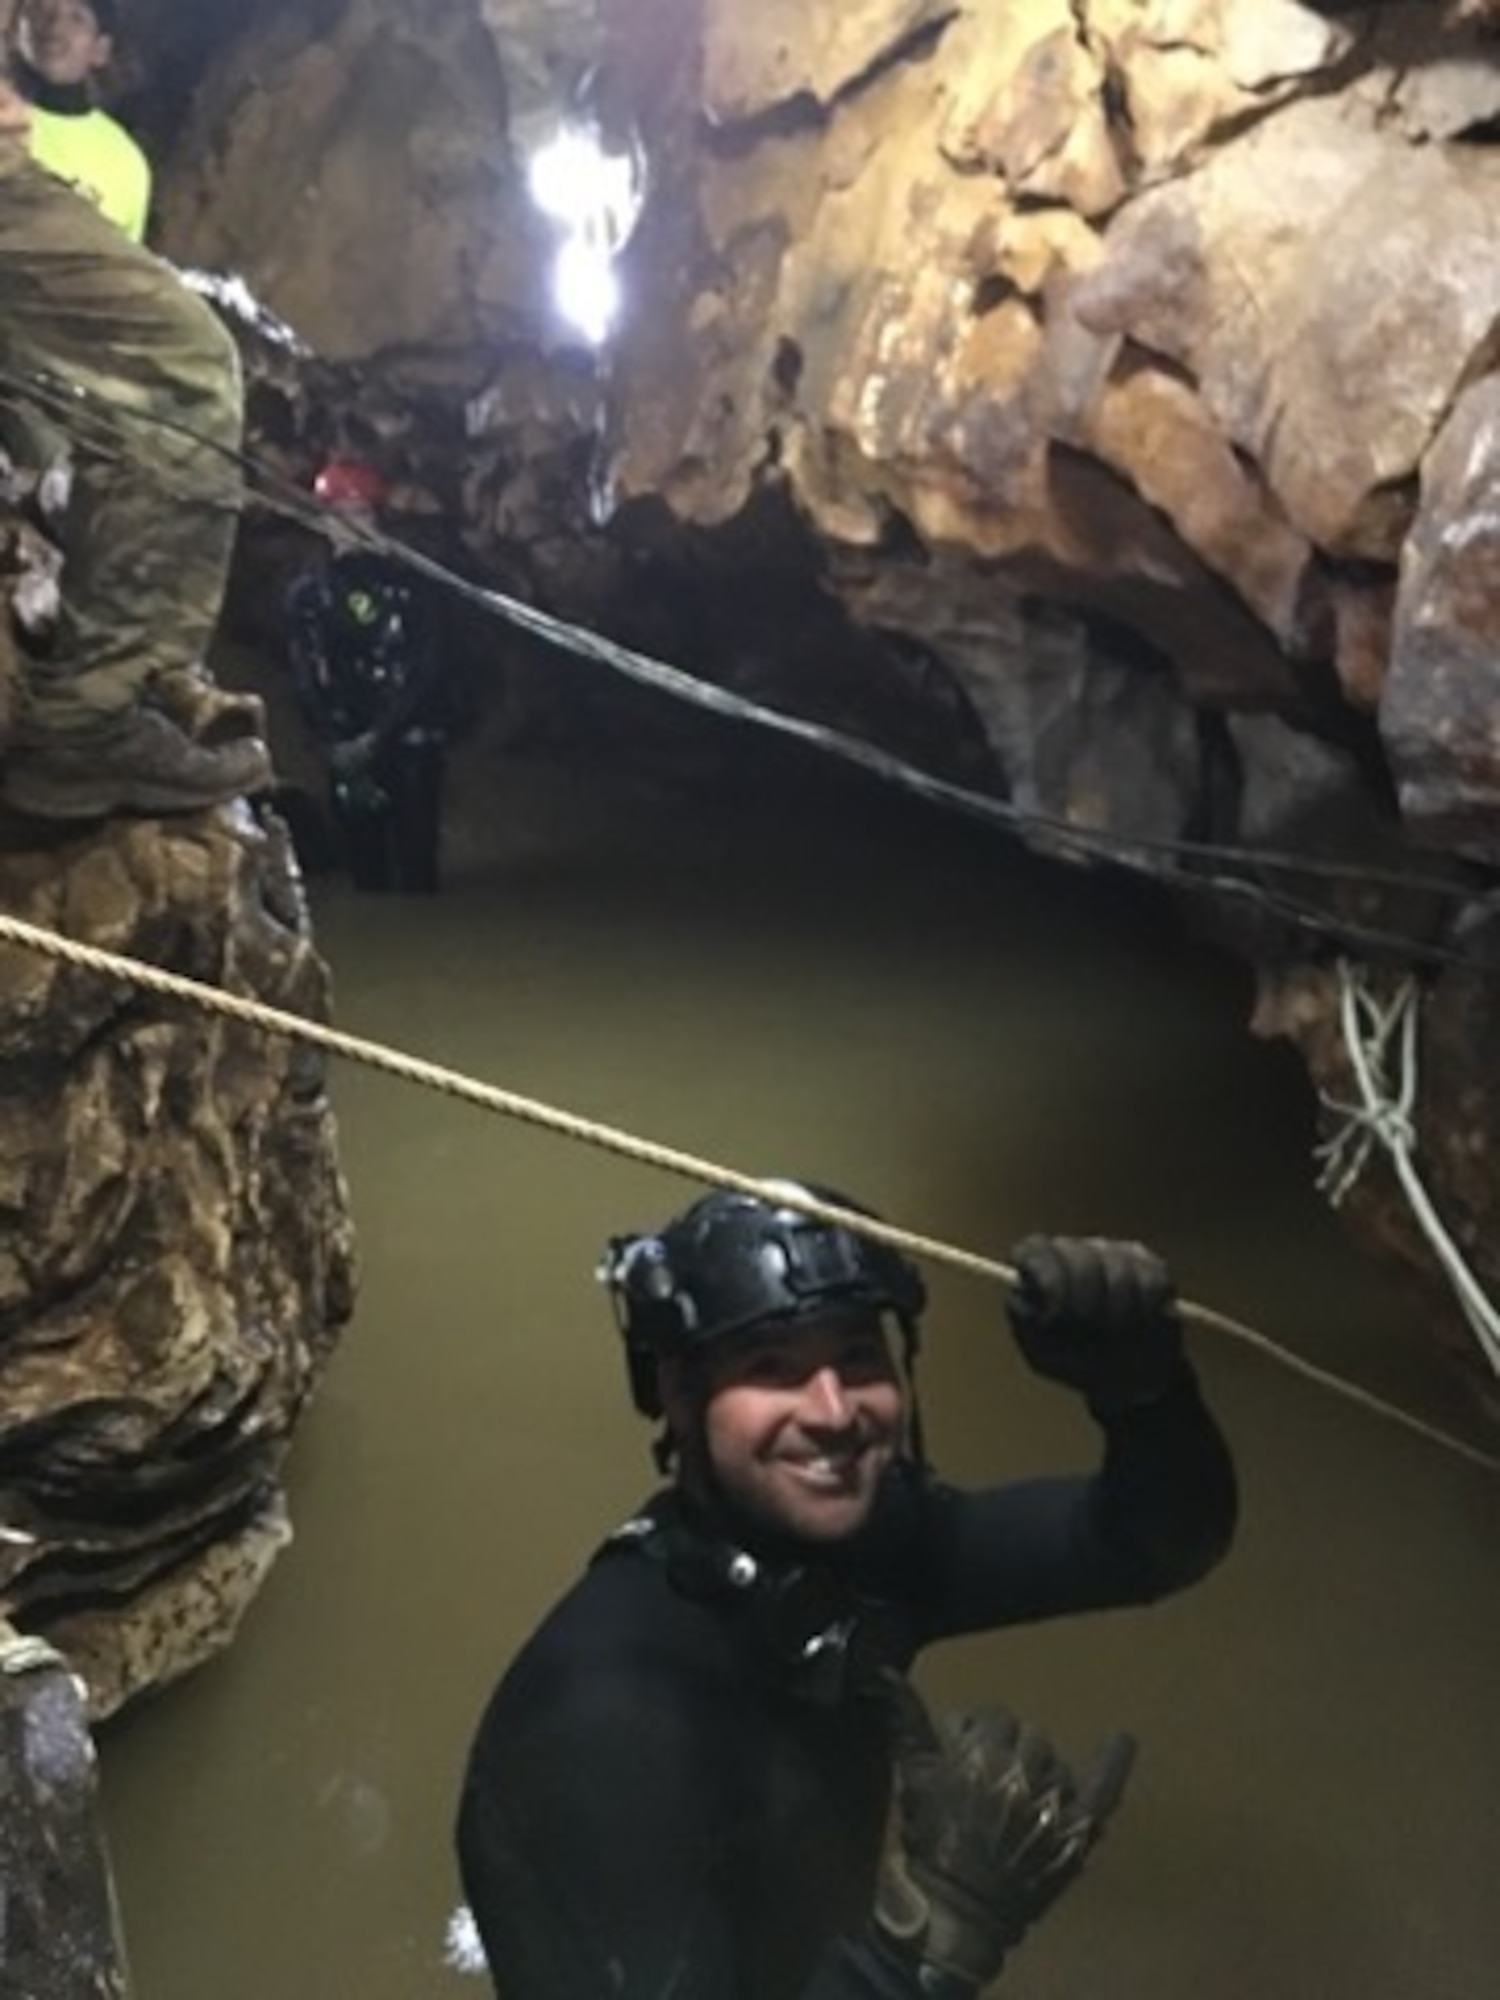 Courtesy photo from U.S. Air Force pararescueman, Tech Sgt Jamie Brisbin of the 106th Rescue Wing's 103rd Rescue Squadron who took part as a diver in the 2018 Thai Cave rescue pictured here with Tech. Sgt. John Merchand.